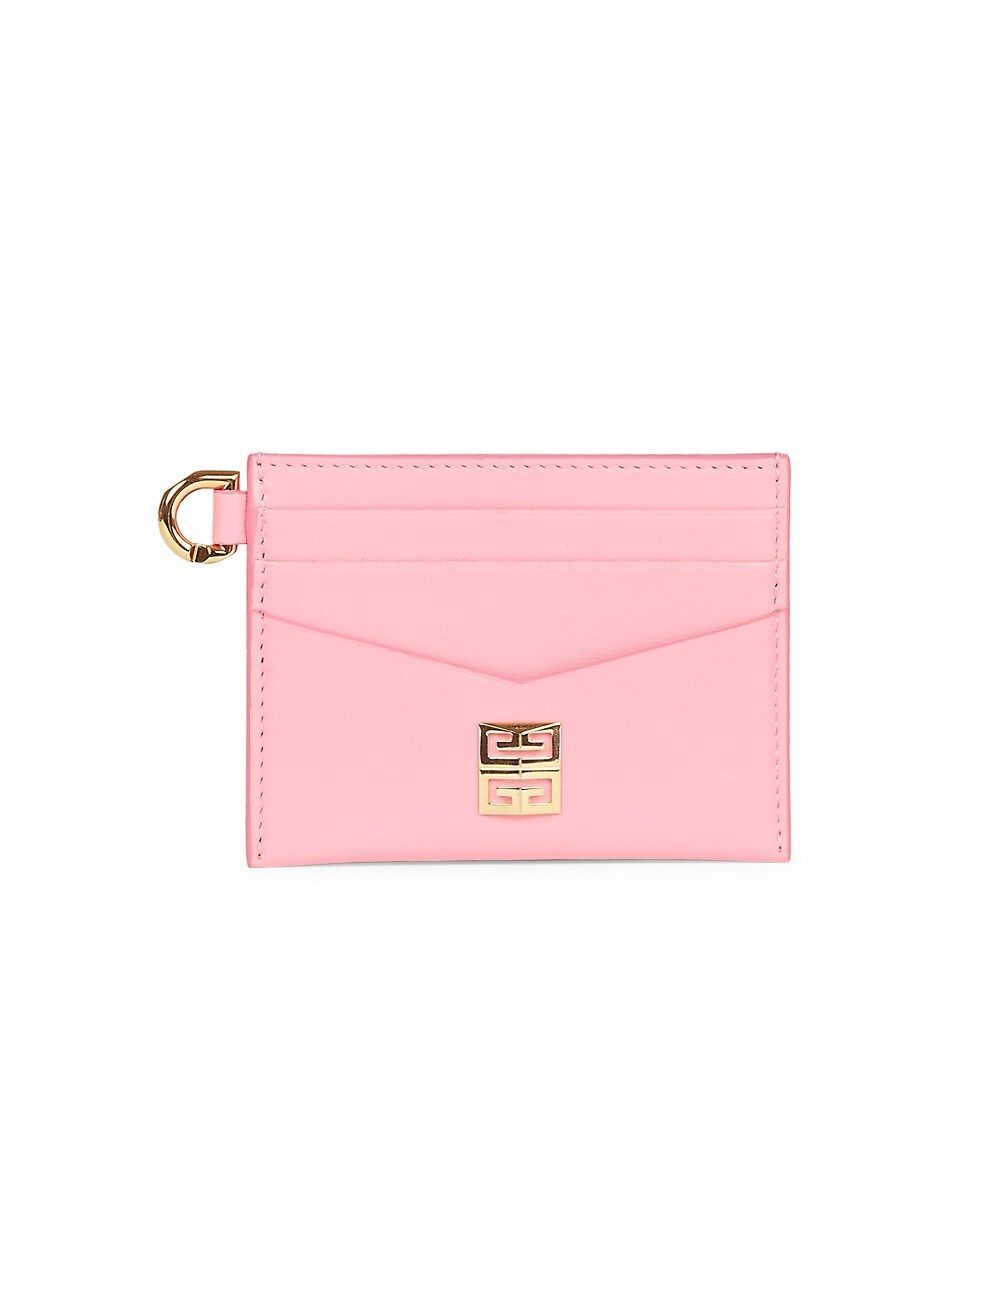 Givenchy 4G Leather Card Case | Saks Fifth Avenue